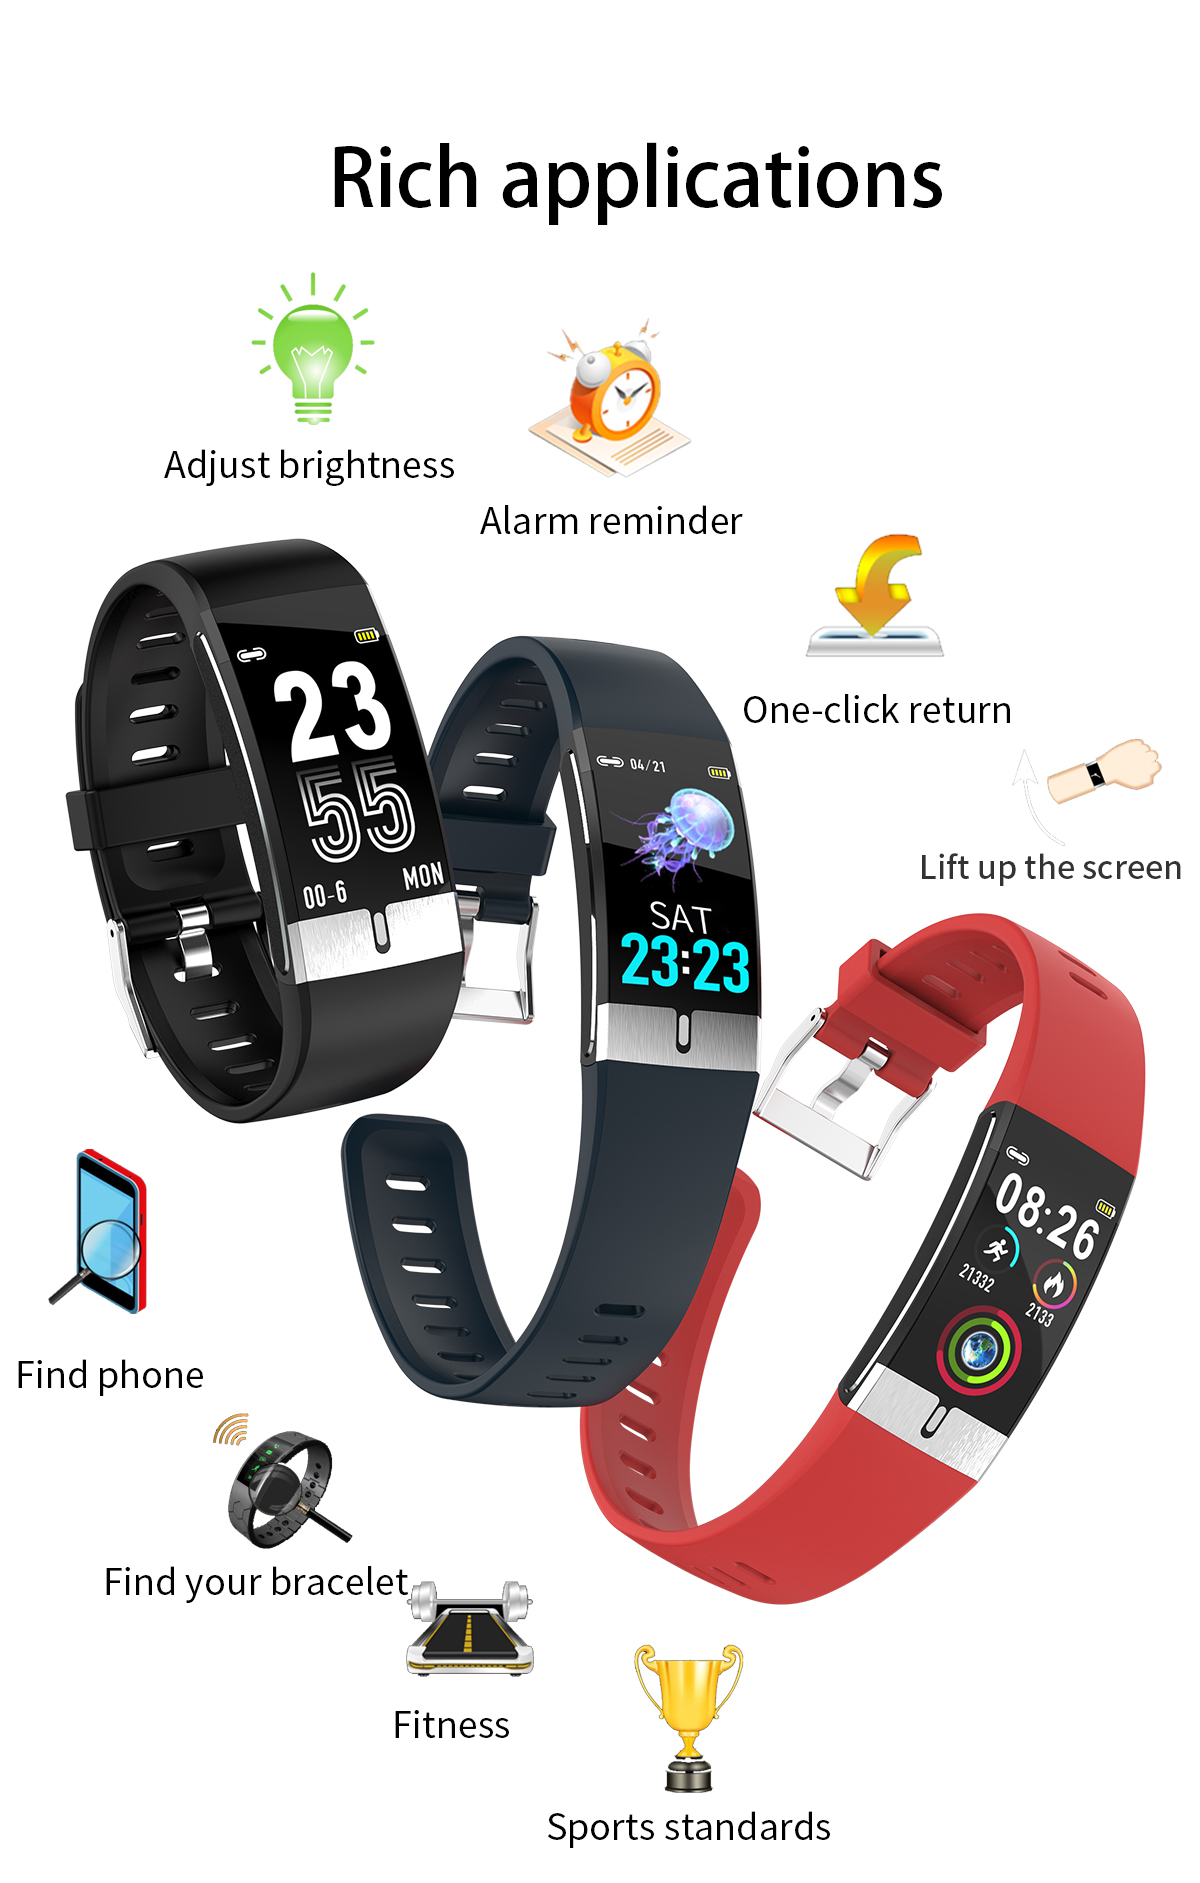 [SPO2 Monitor]Bakeey E66 Thermometer ECG+PPG Heart Rate Blood Pressure Oxygen Monitor IP68 Waterproof USB Charging Smart Watch